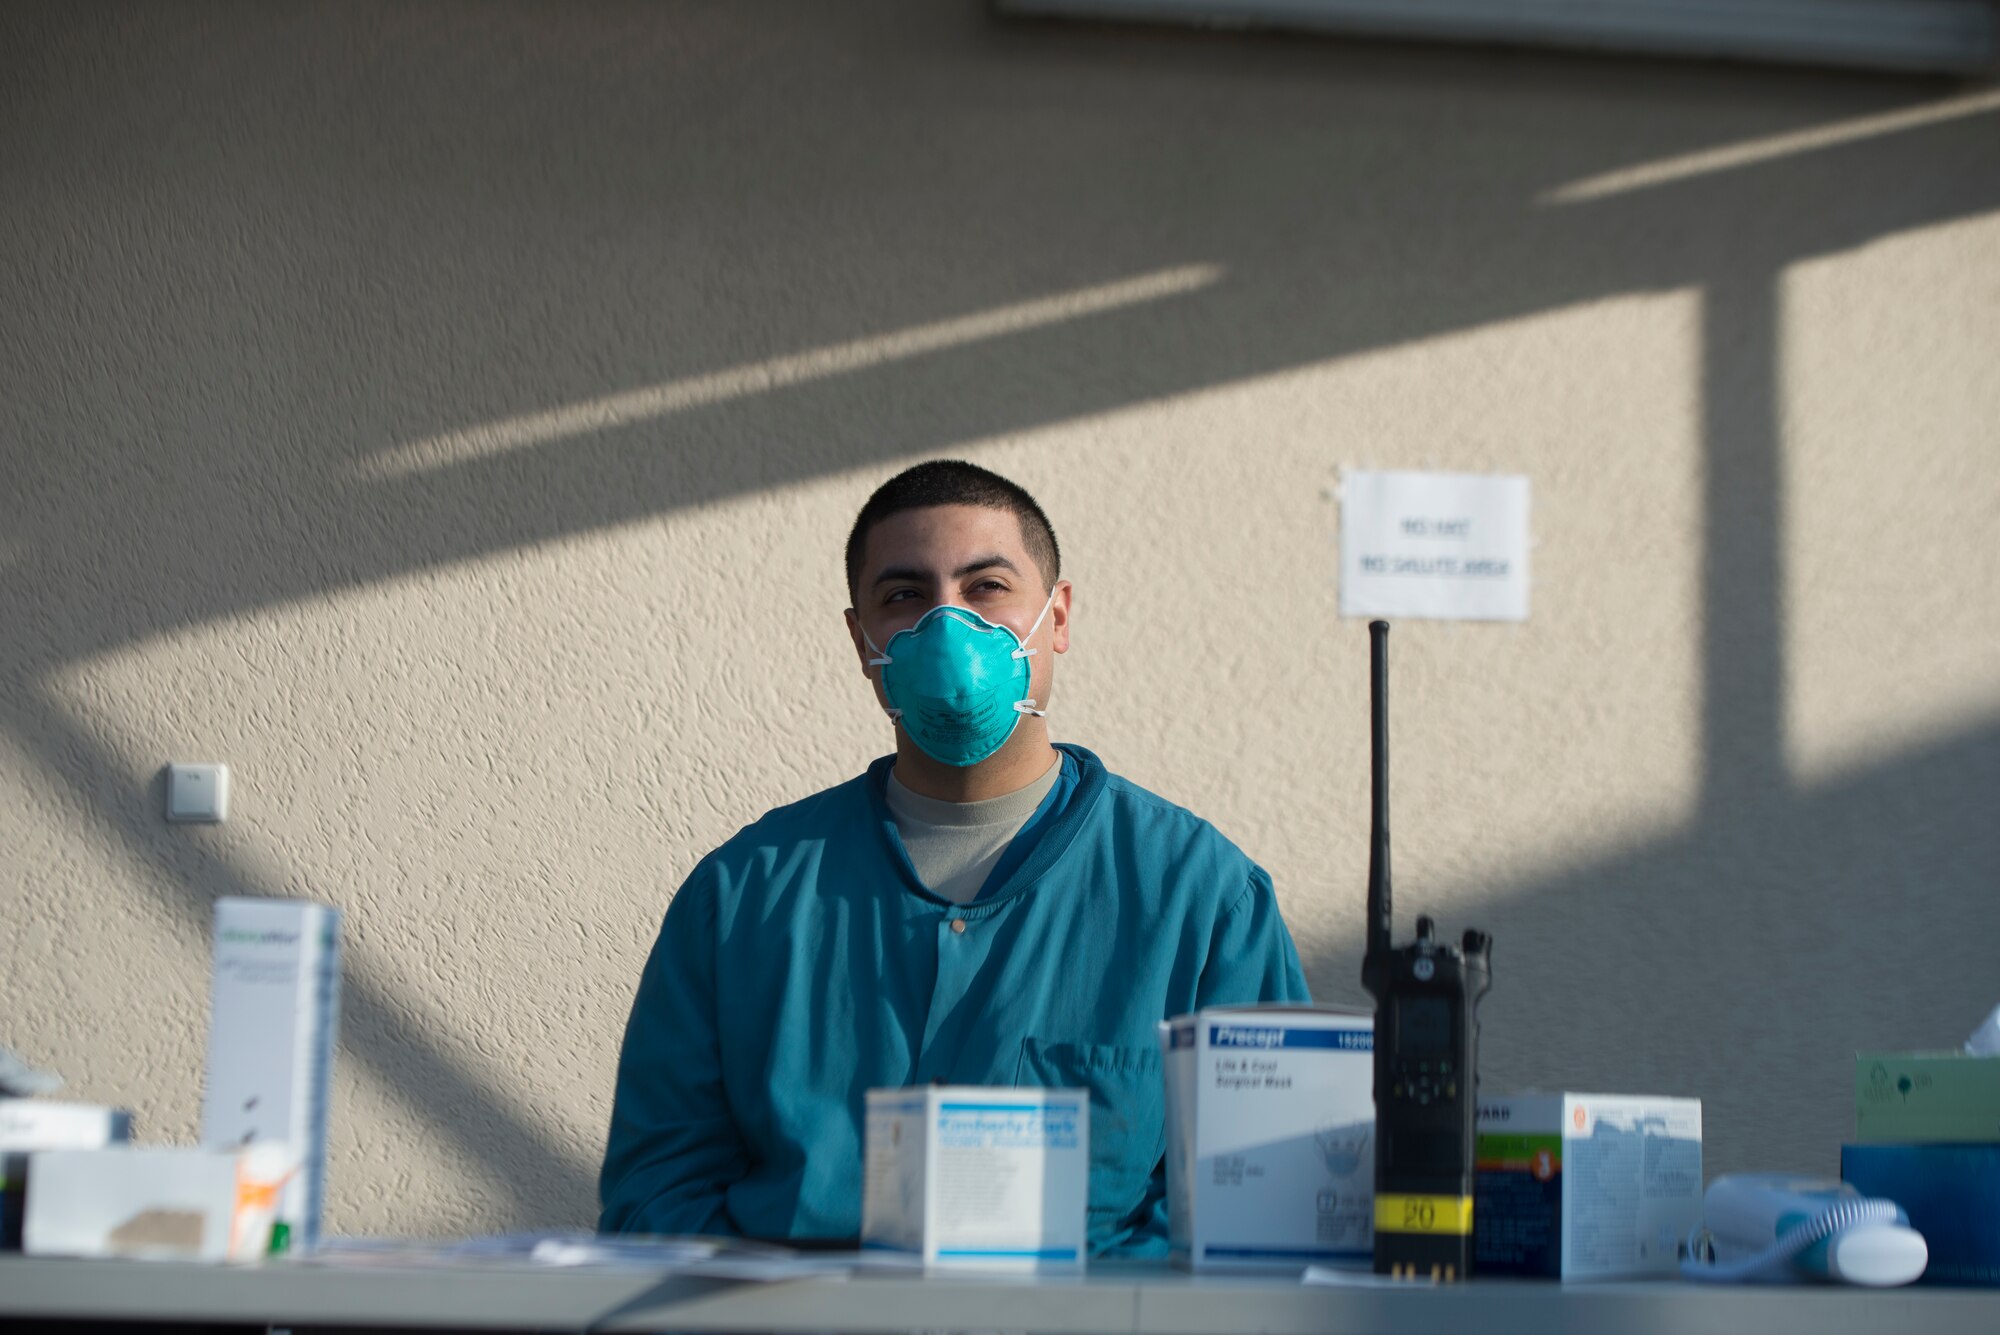 A picture of an Airman waiting for patients.